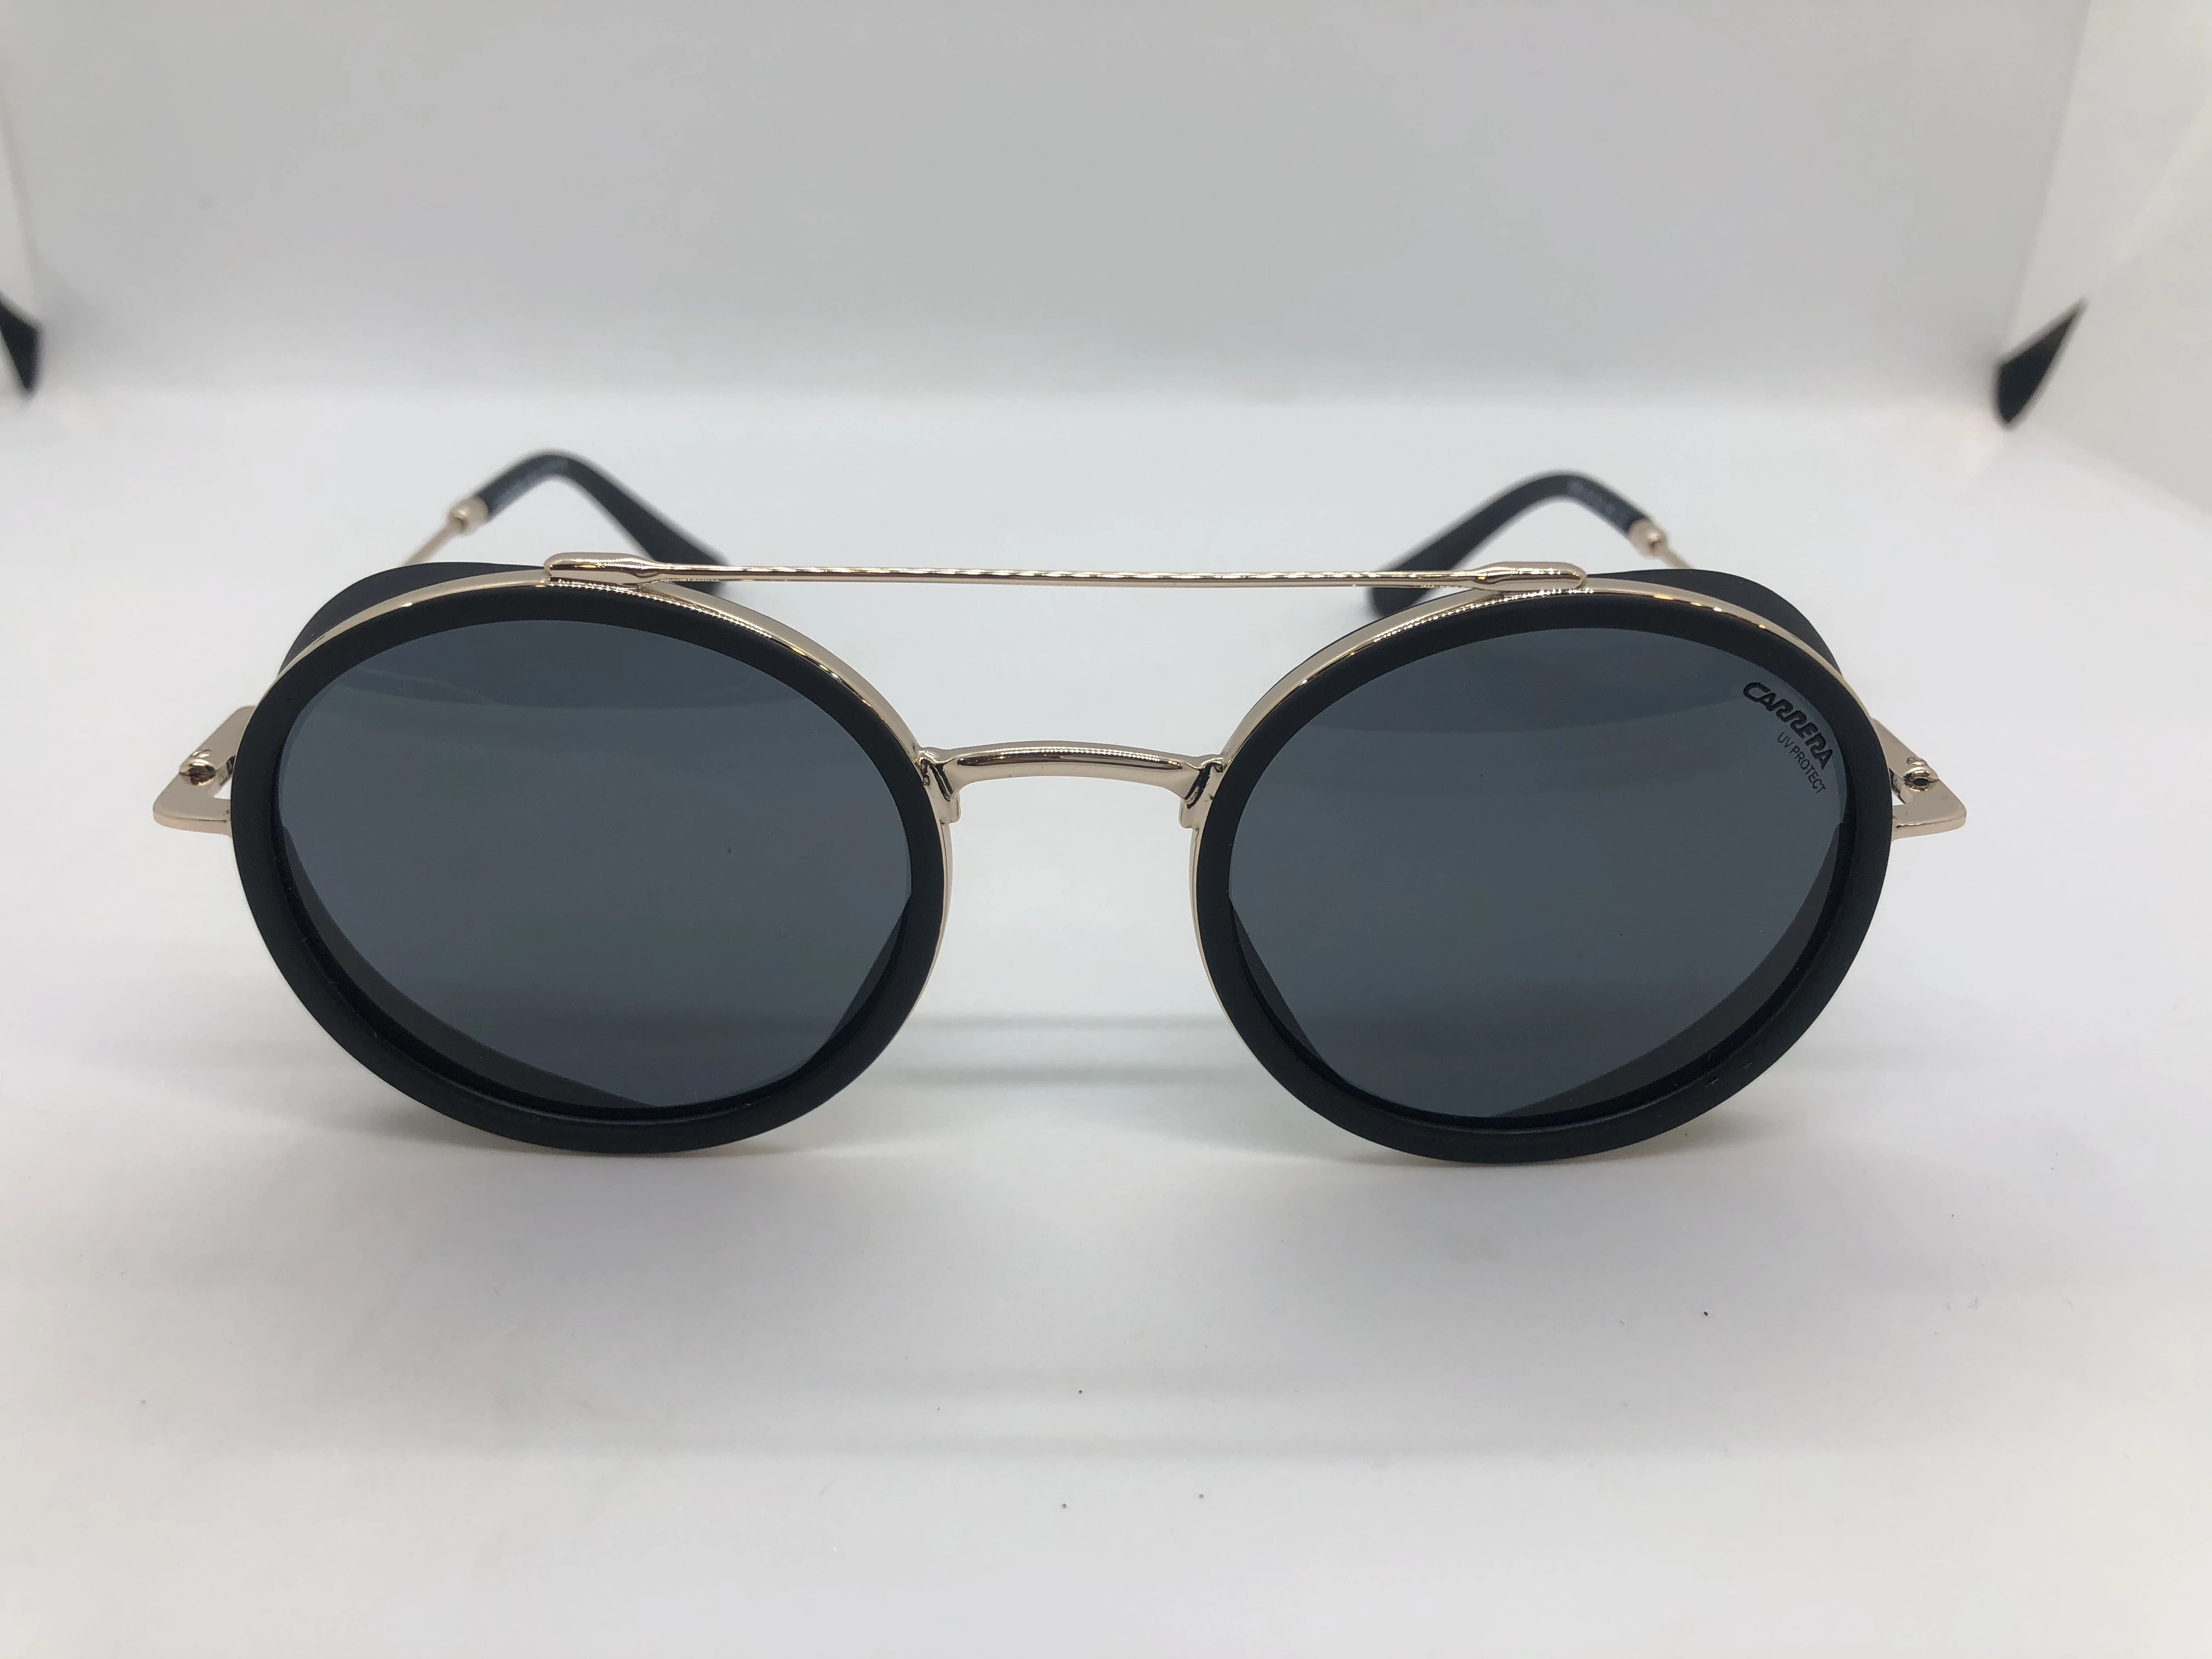 Sunglasses - black from Carrera - with a gold metal frame - and black lenses - for men